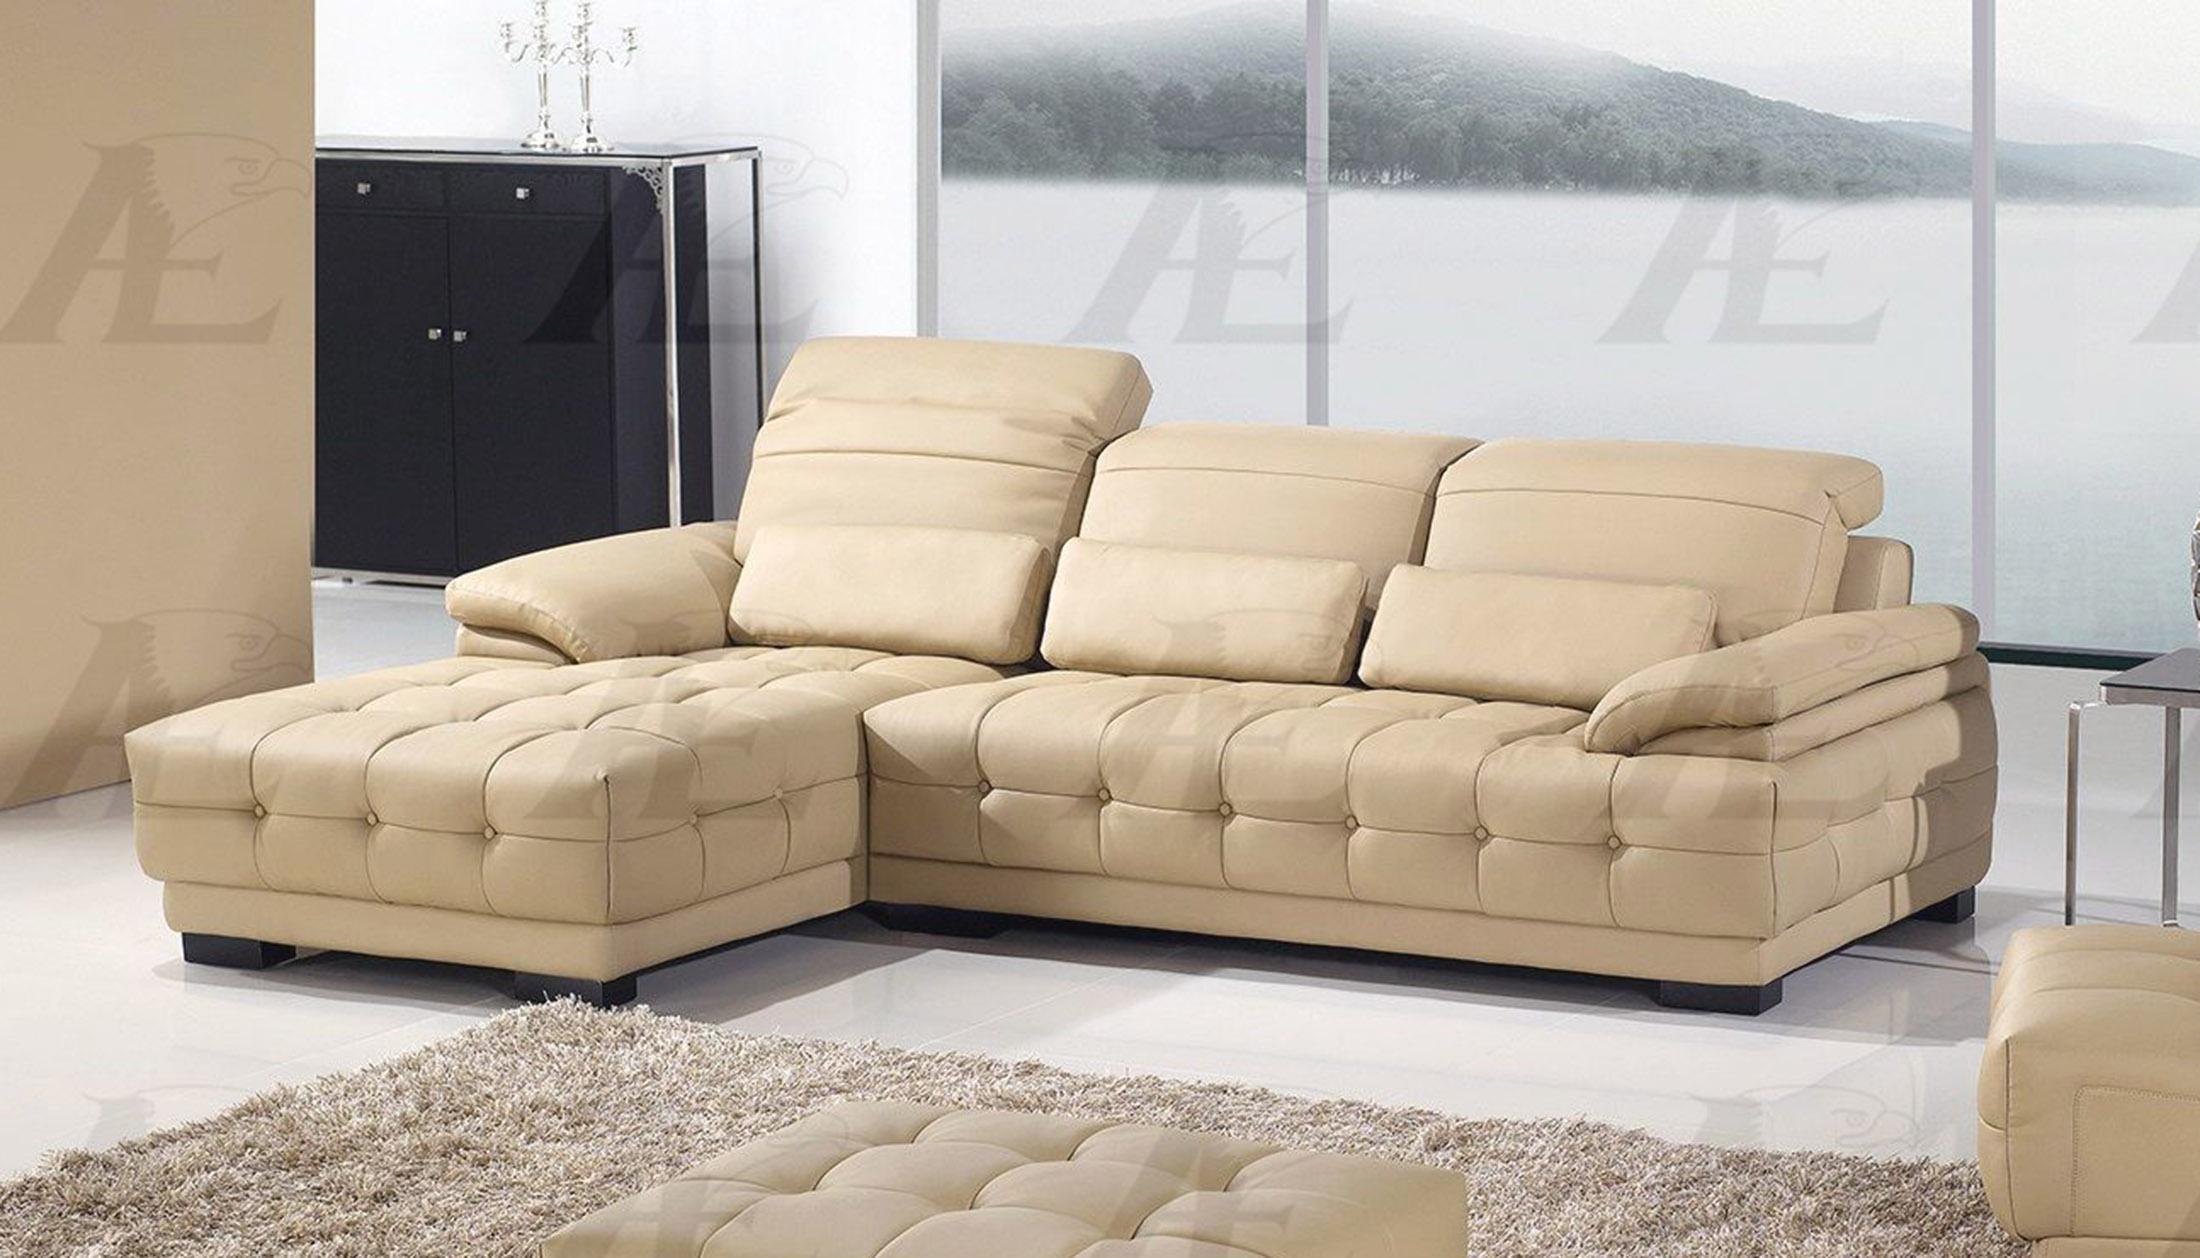 

                    
American Eagle Furniture AE-L296-BK Sofa Chaise Chair and Ottoman Set Tan Bonded Leather Purchase 
